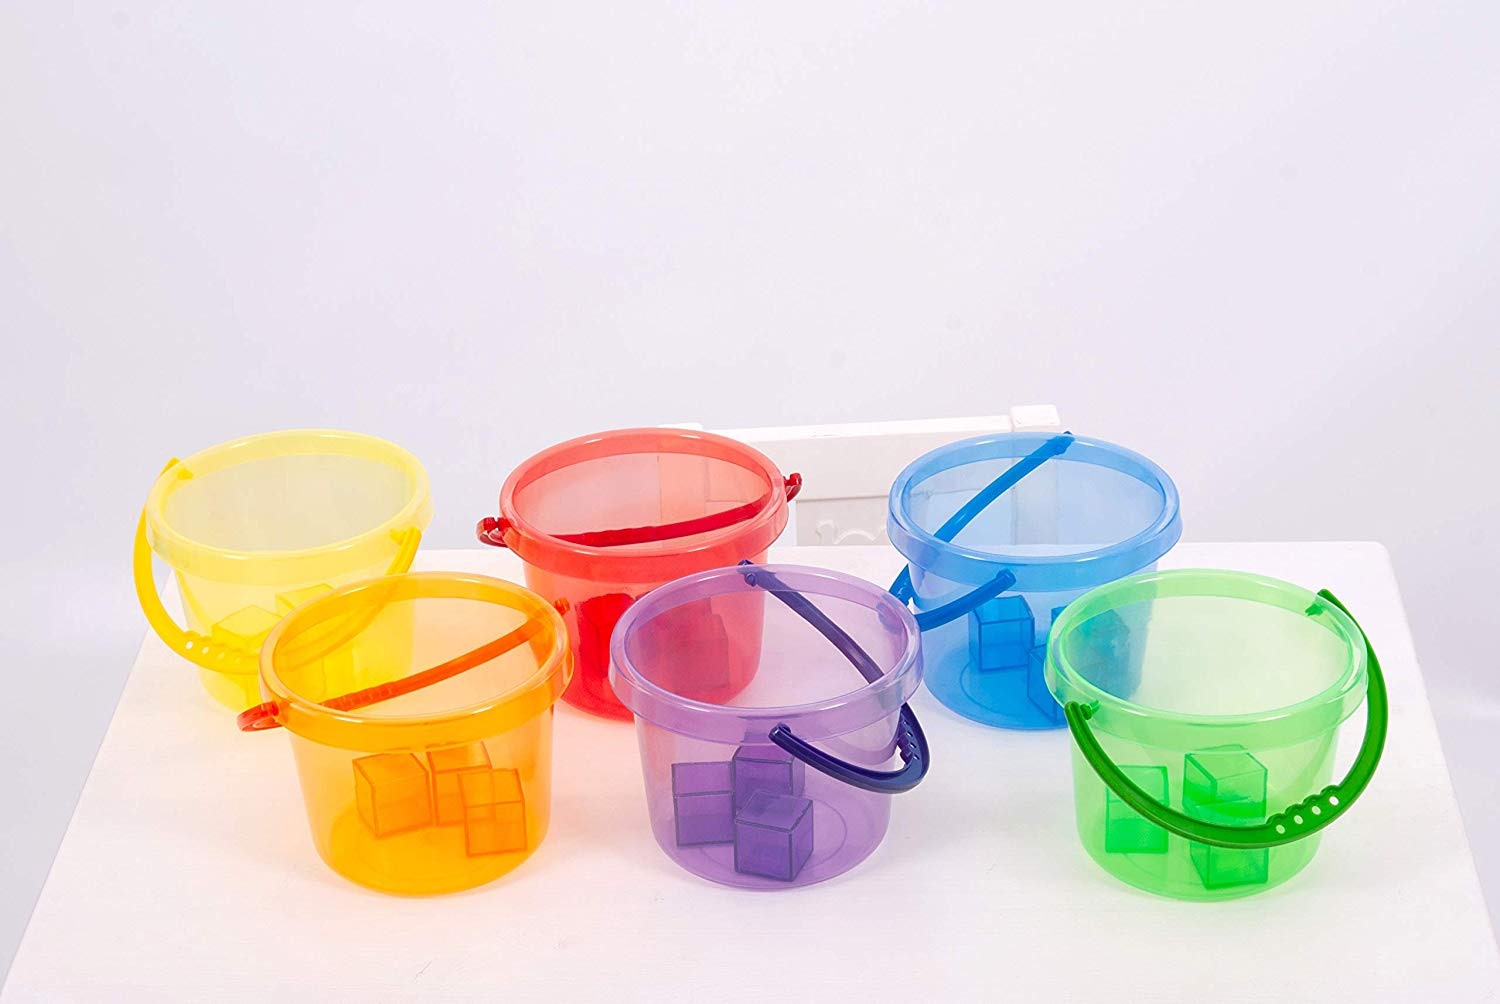 Tickit Translucent bucket set – Children’s Learning & Vocational Sensory Toys For Children Aged 0-8 Years – Summer Toys/ Outdoor Toys